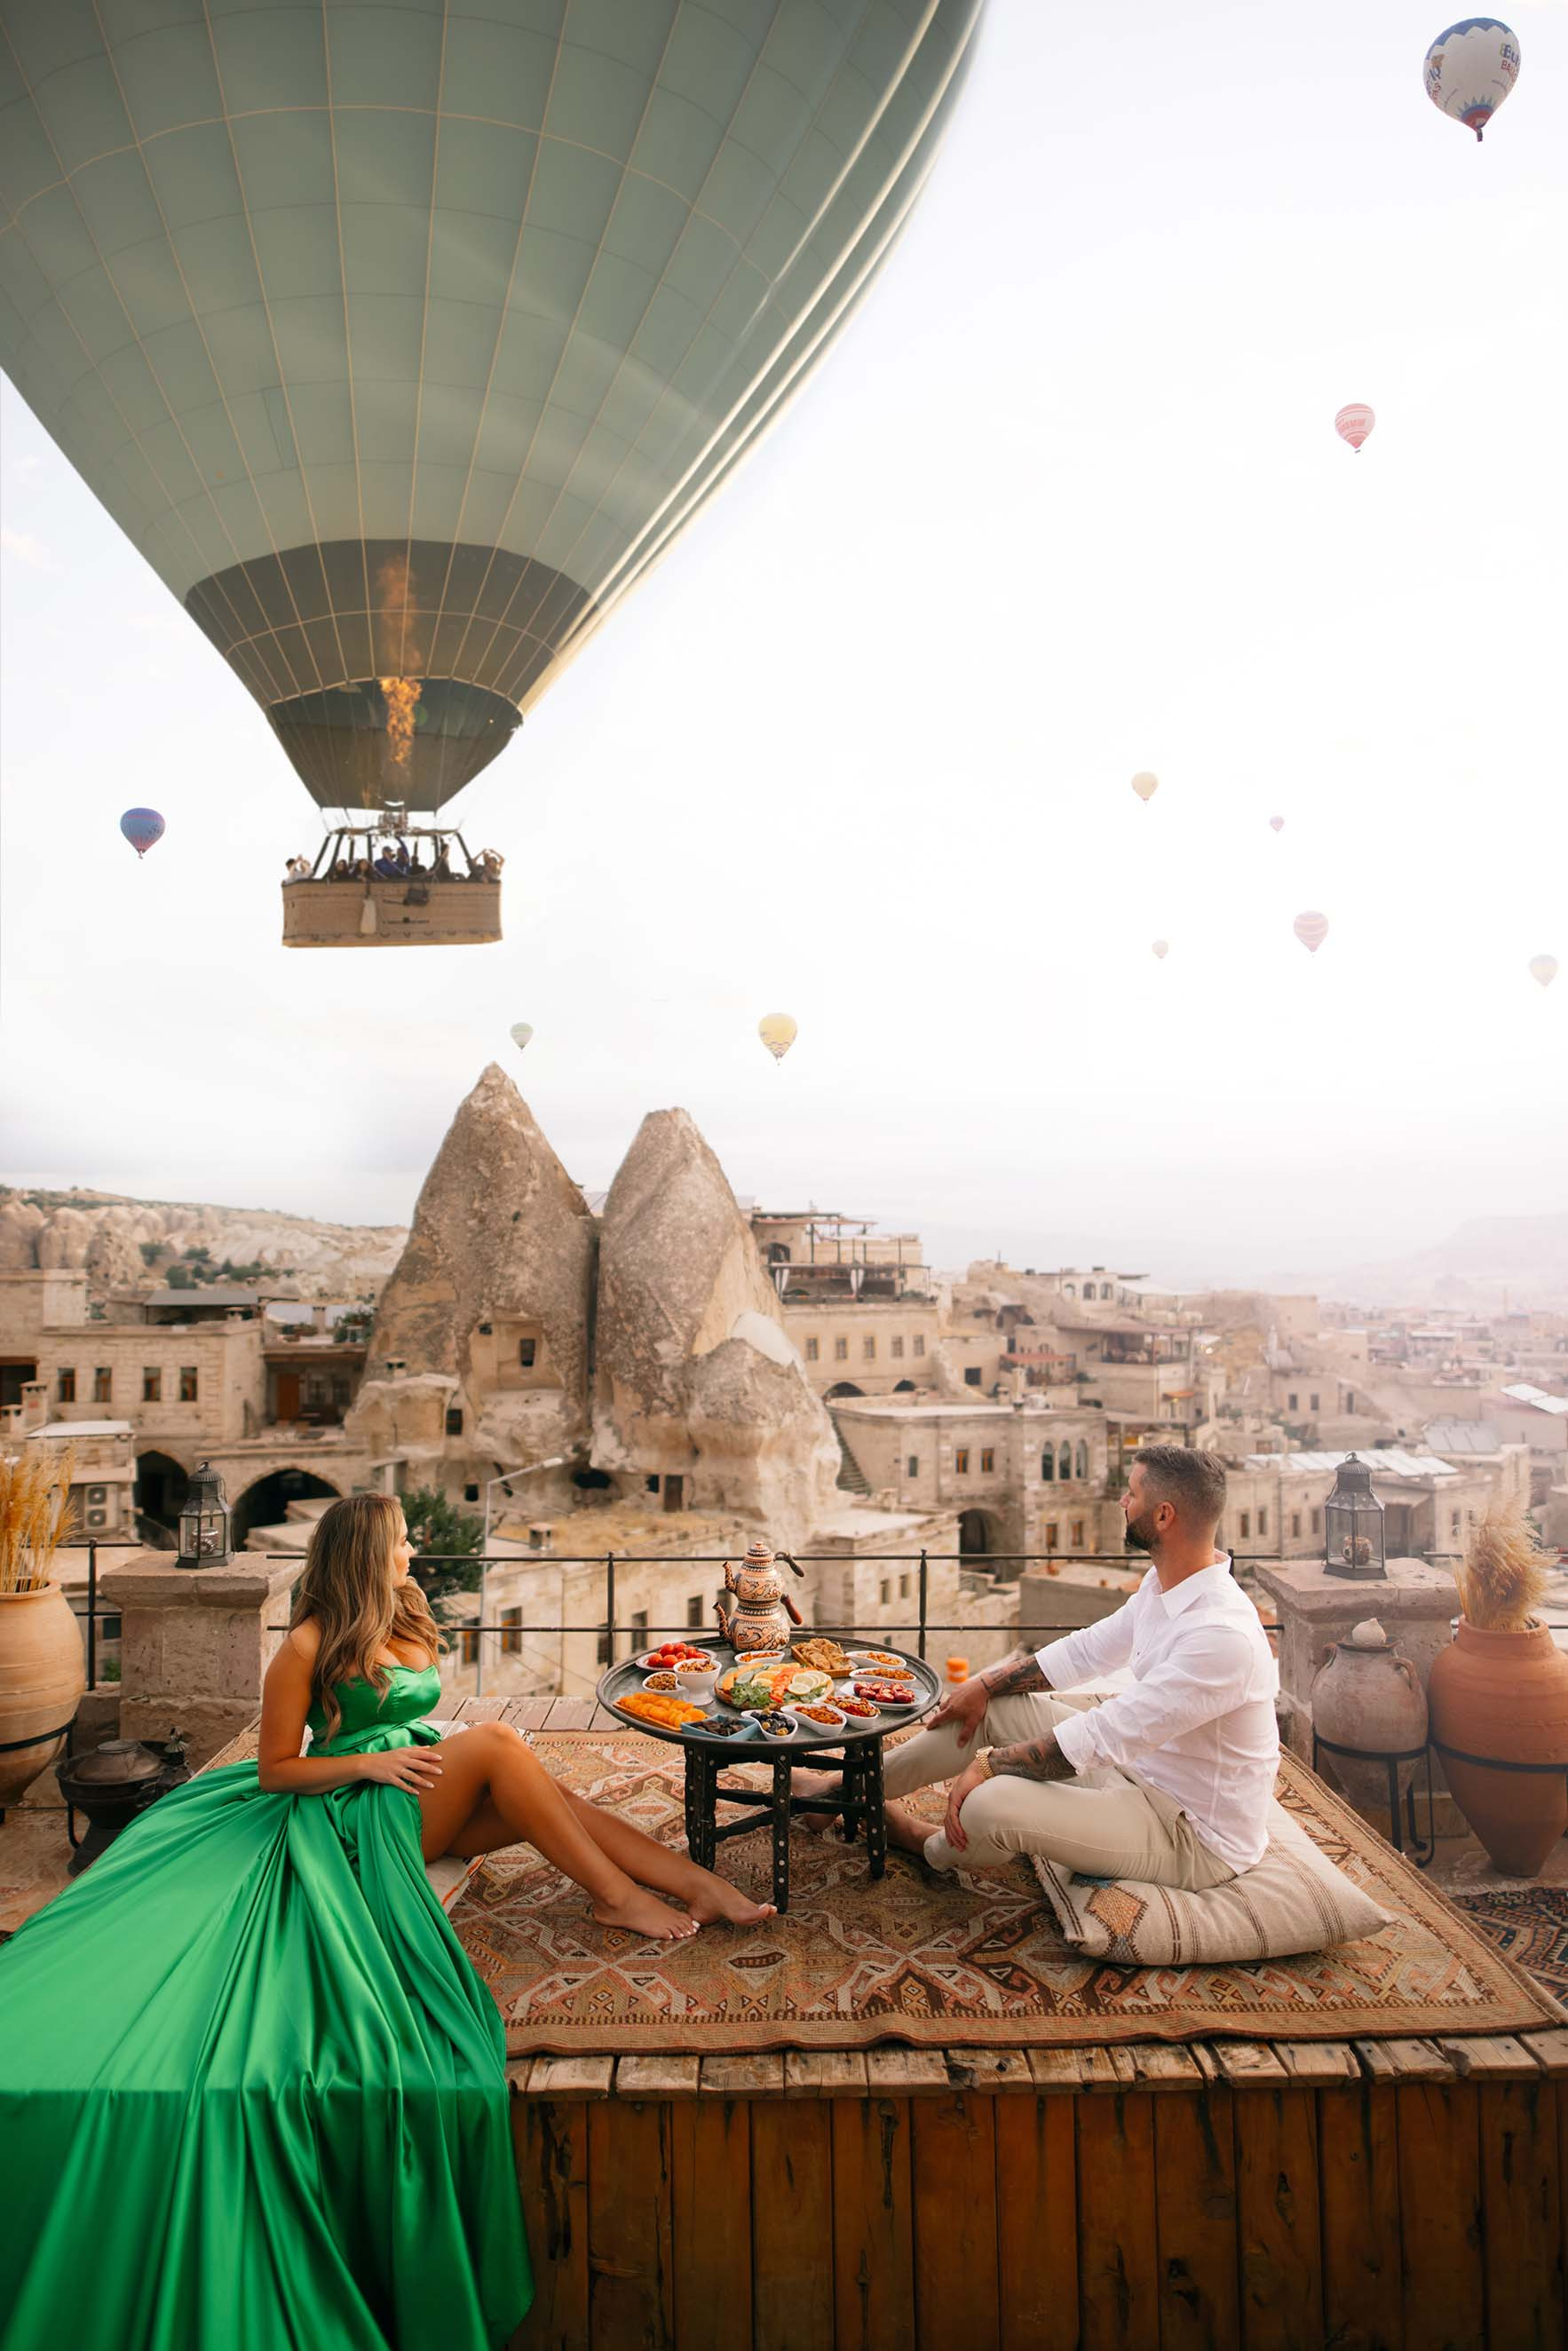 Get your picture taken with the most beautiful balloon views of Cappadocia